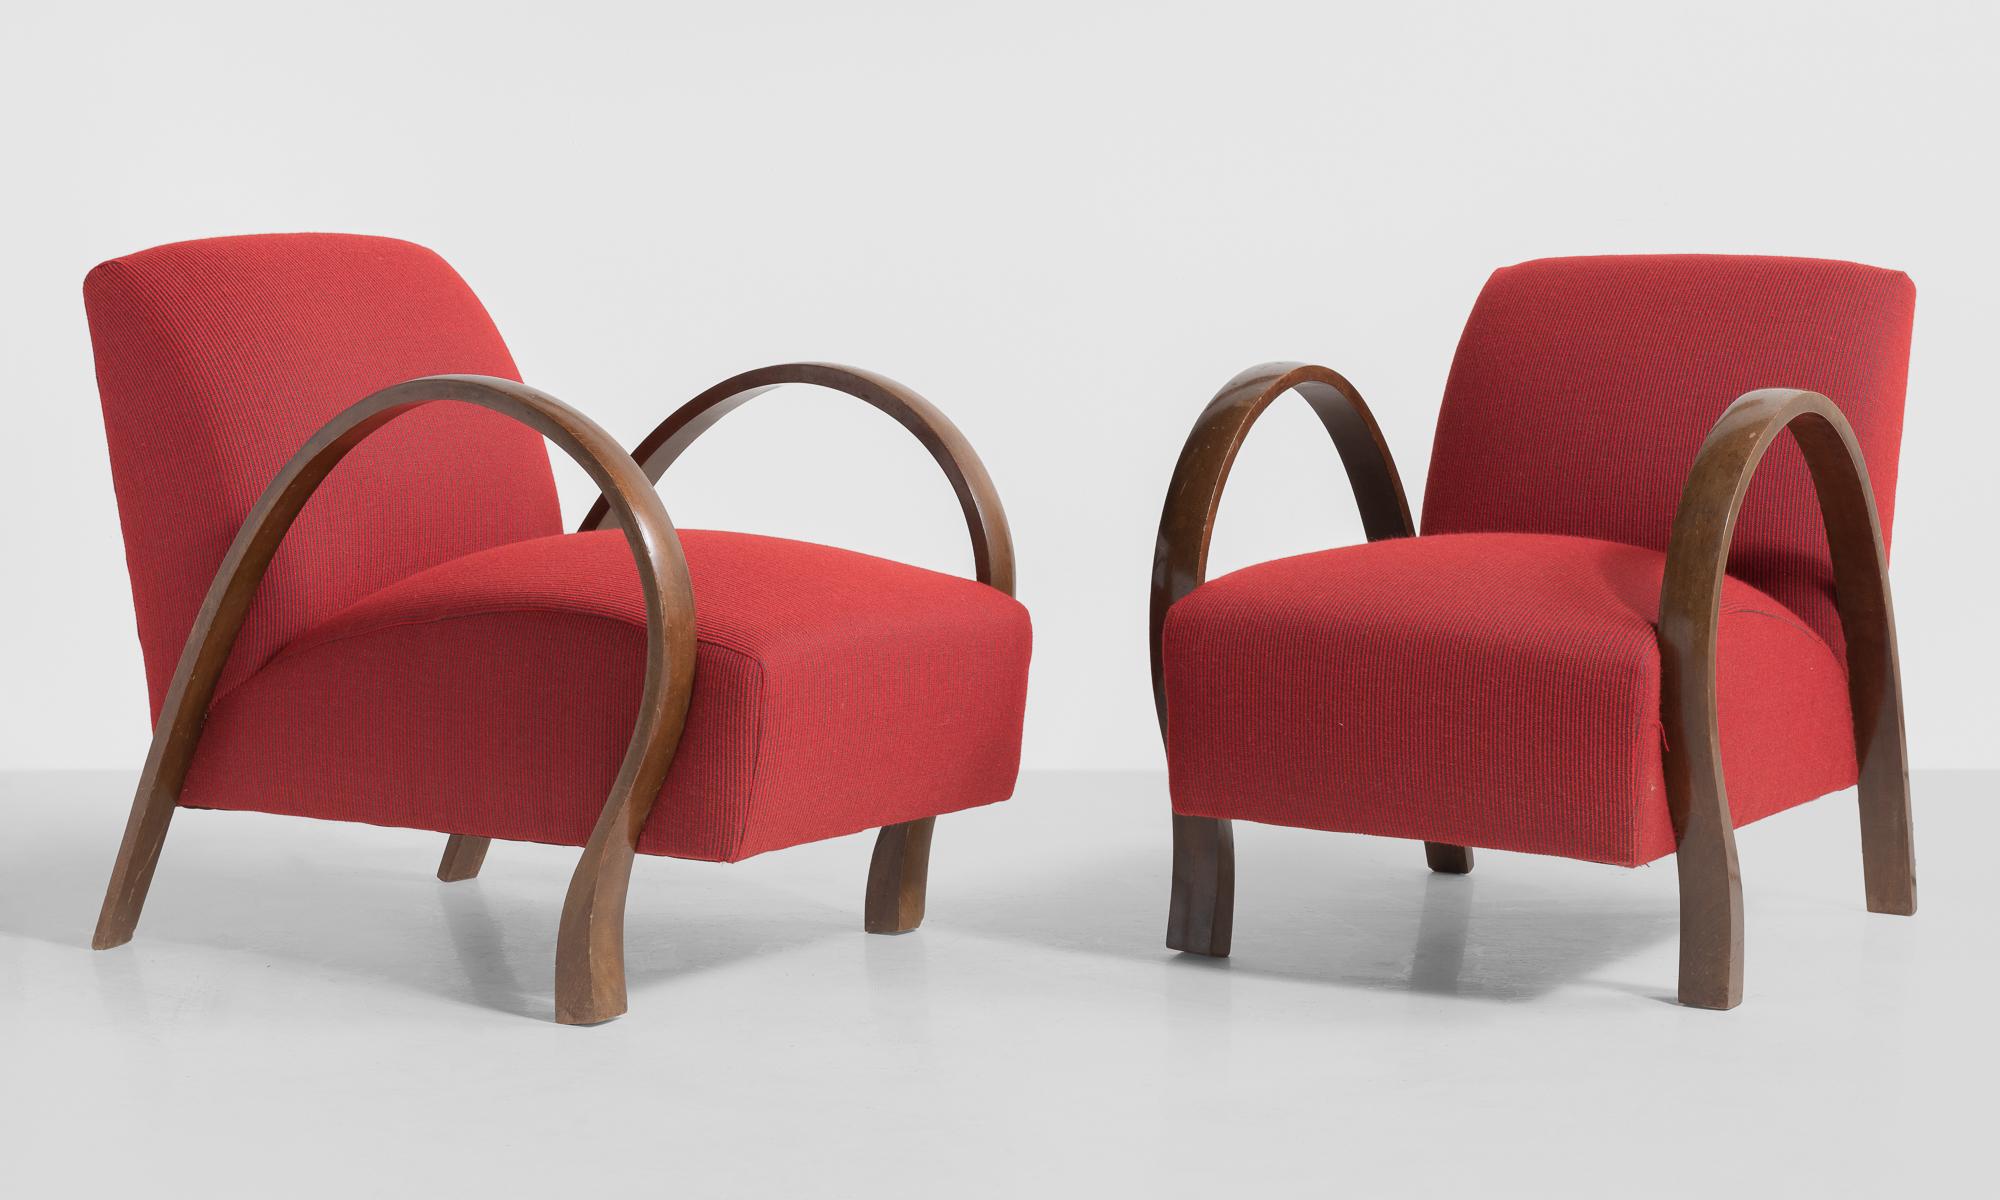 Pair of modern bentwood armchairs, Italy, circa 1930.

Bentwood arms with unique form. Newly reupholstered in Garnet color Wool Rib fabric by Maharam. 

Measures: 22.25” W x 31.5” D x 28” H x 16” seat.